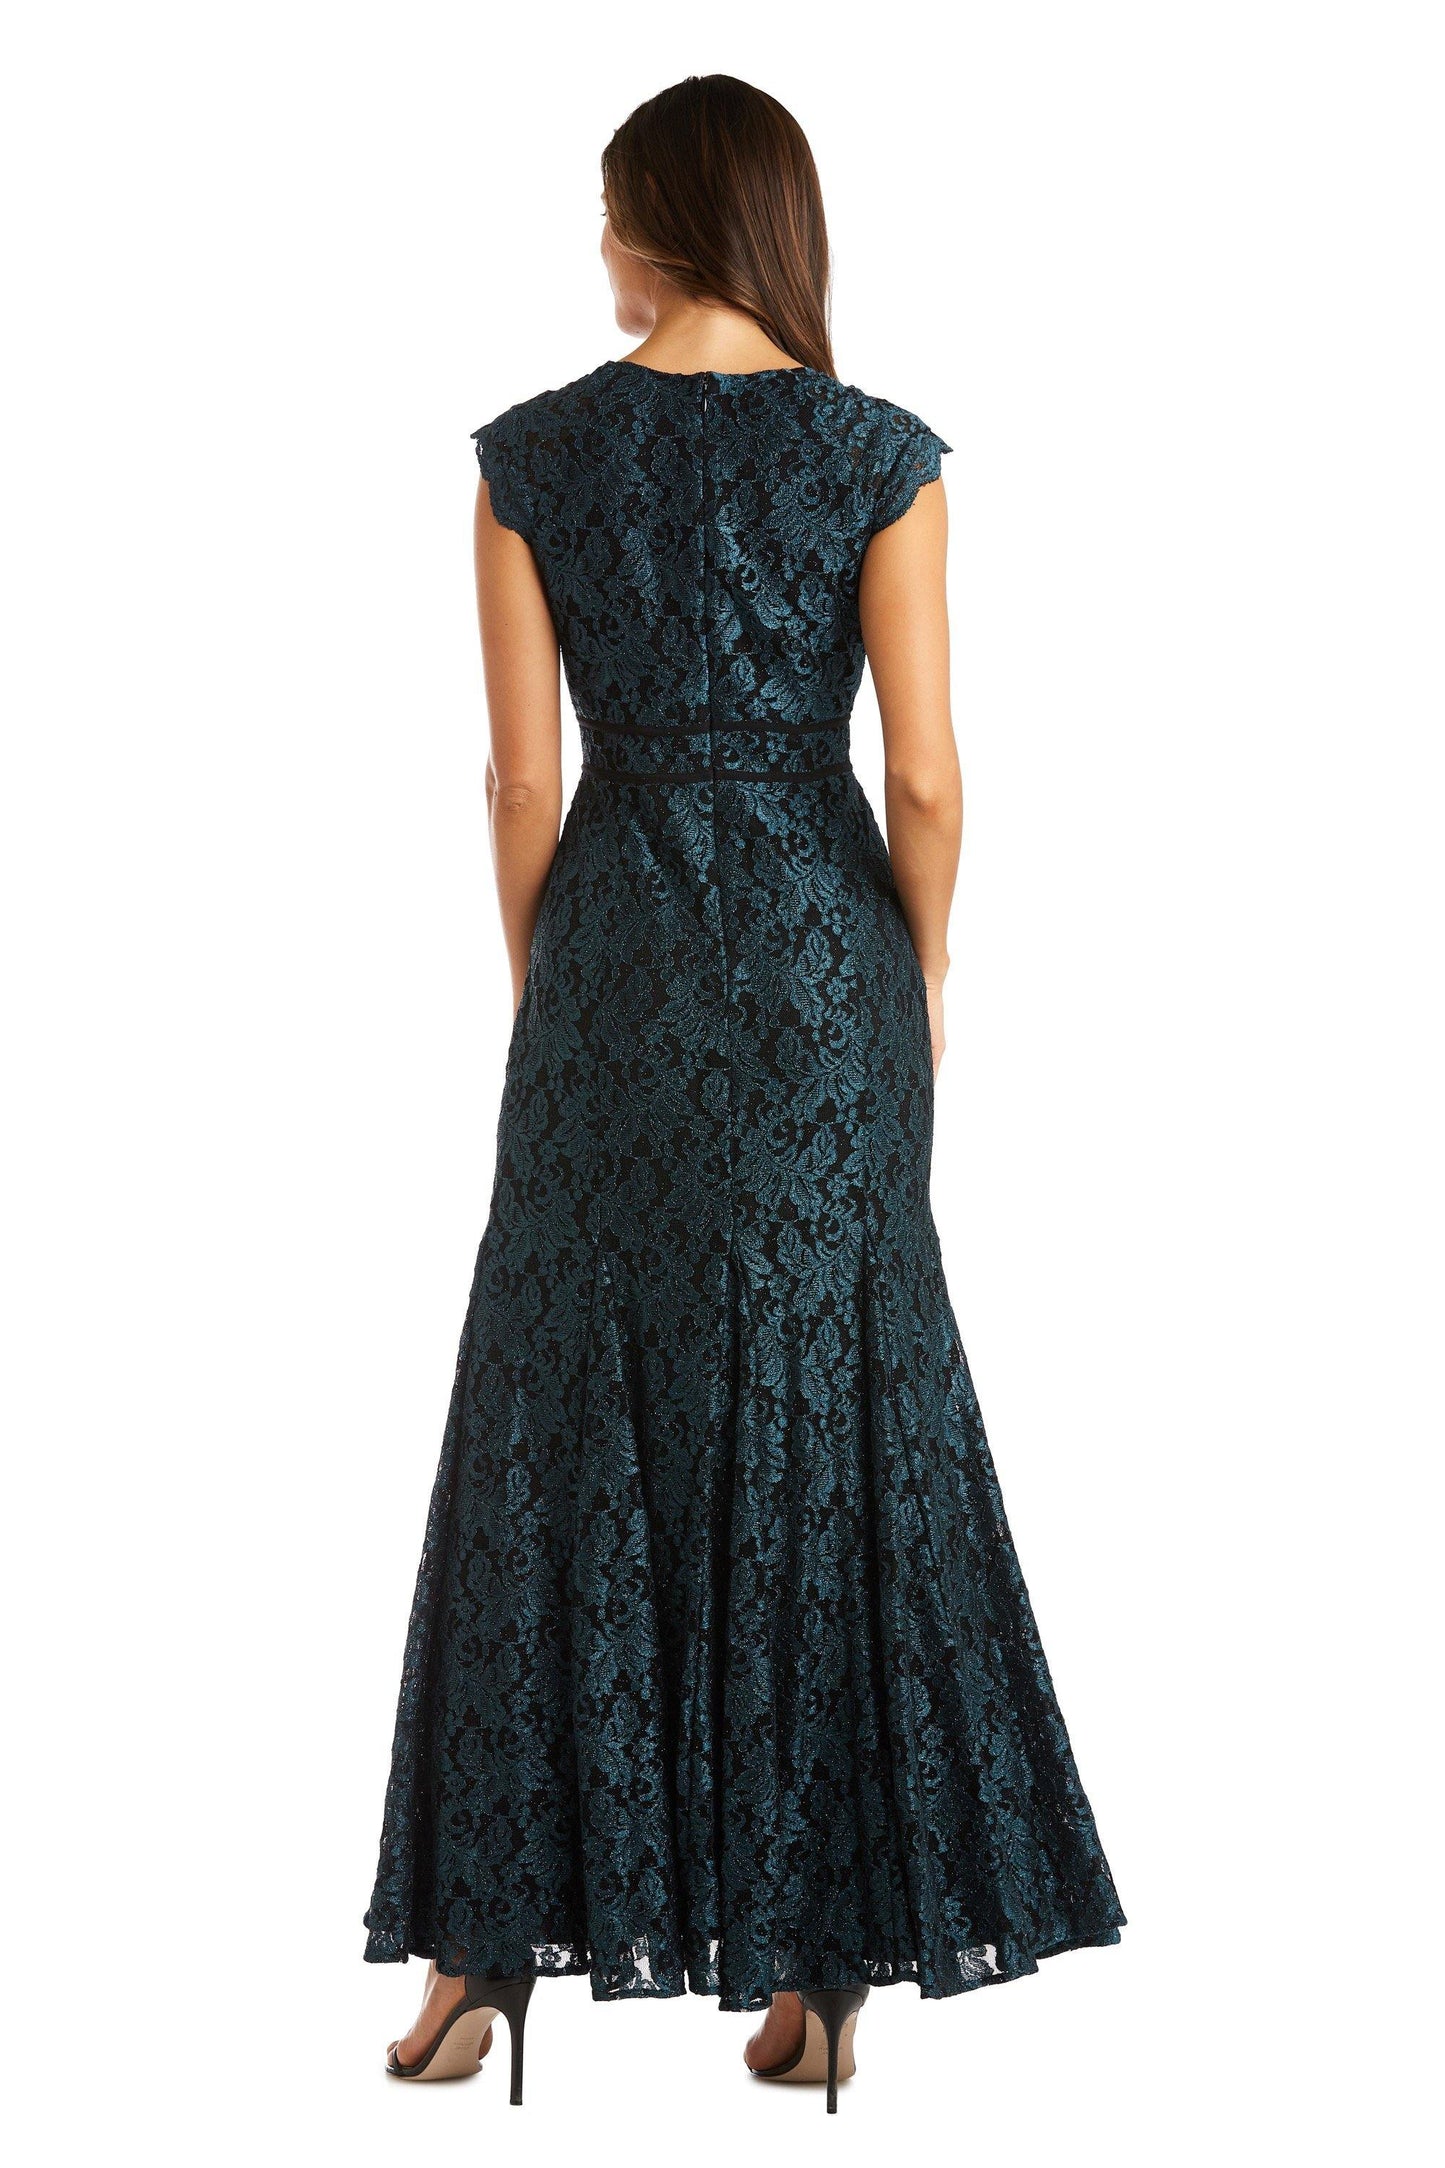 Nightway Long Formal Dress 21842 - The Dress Outlet